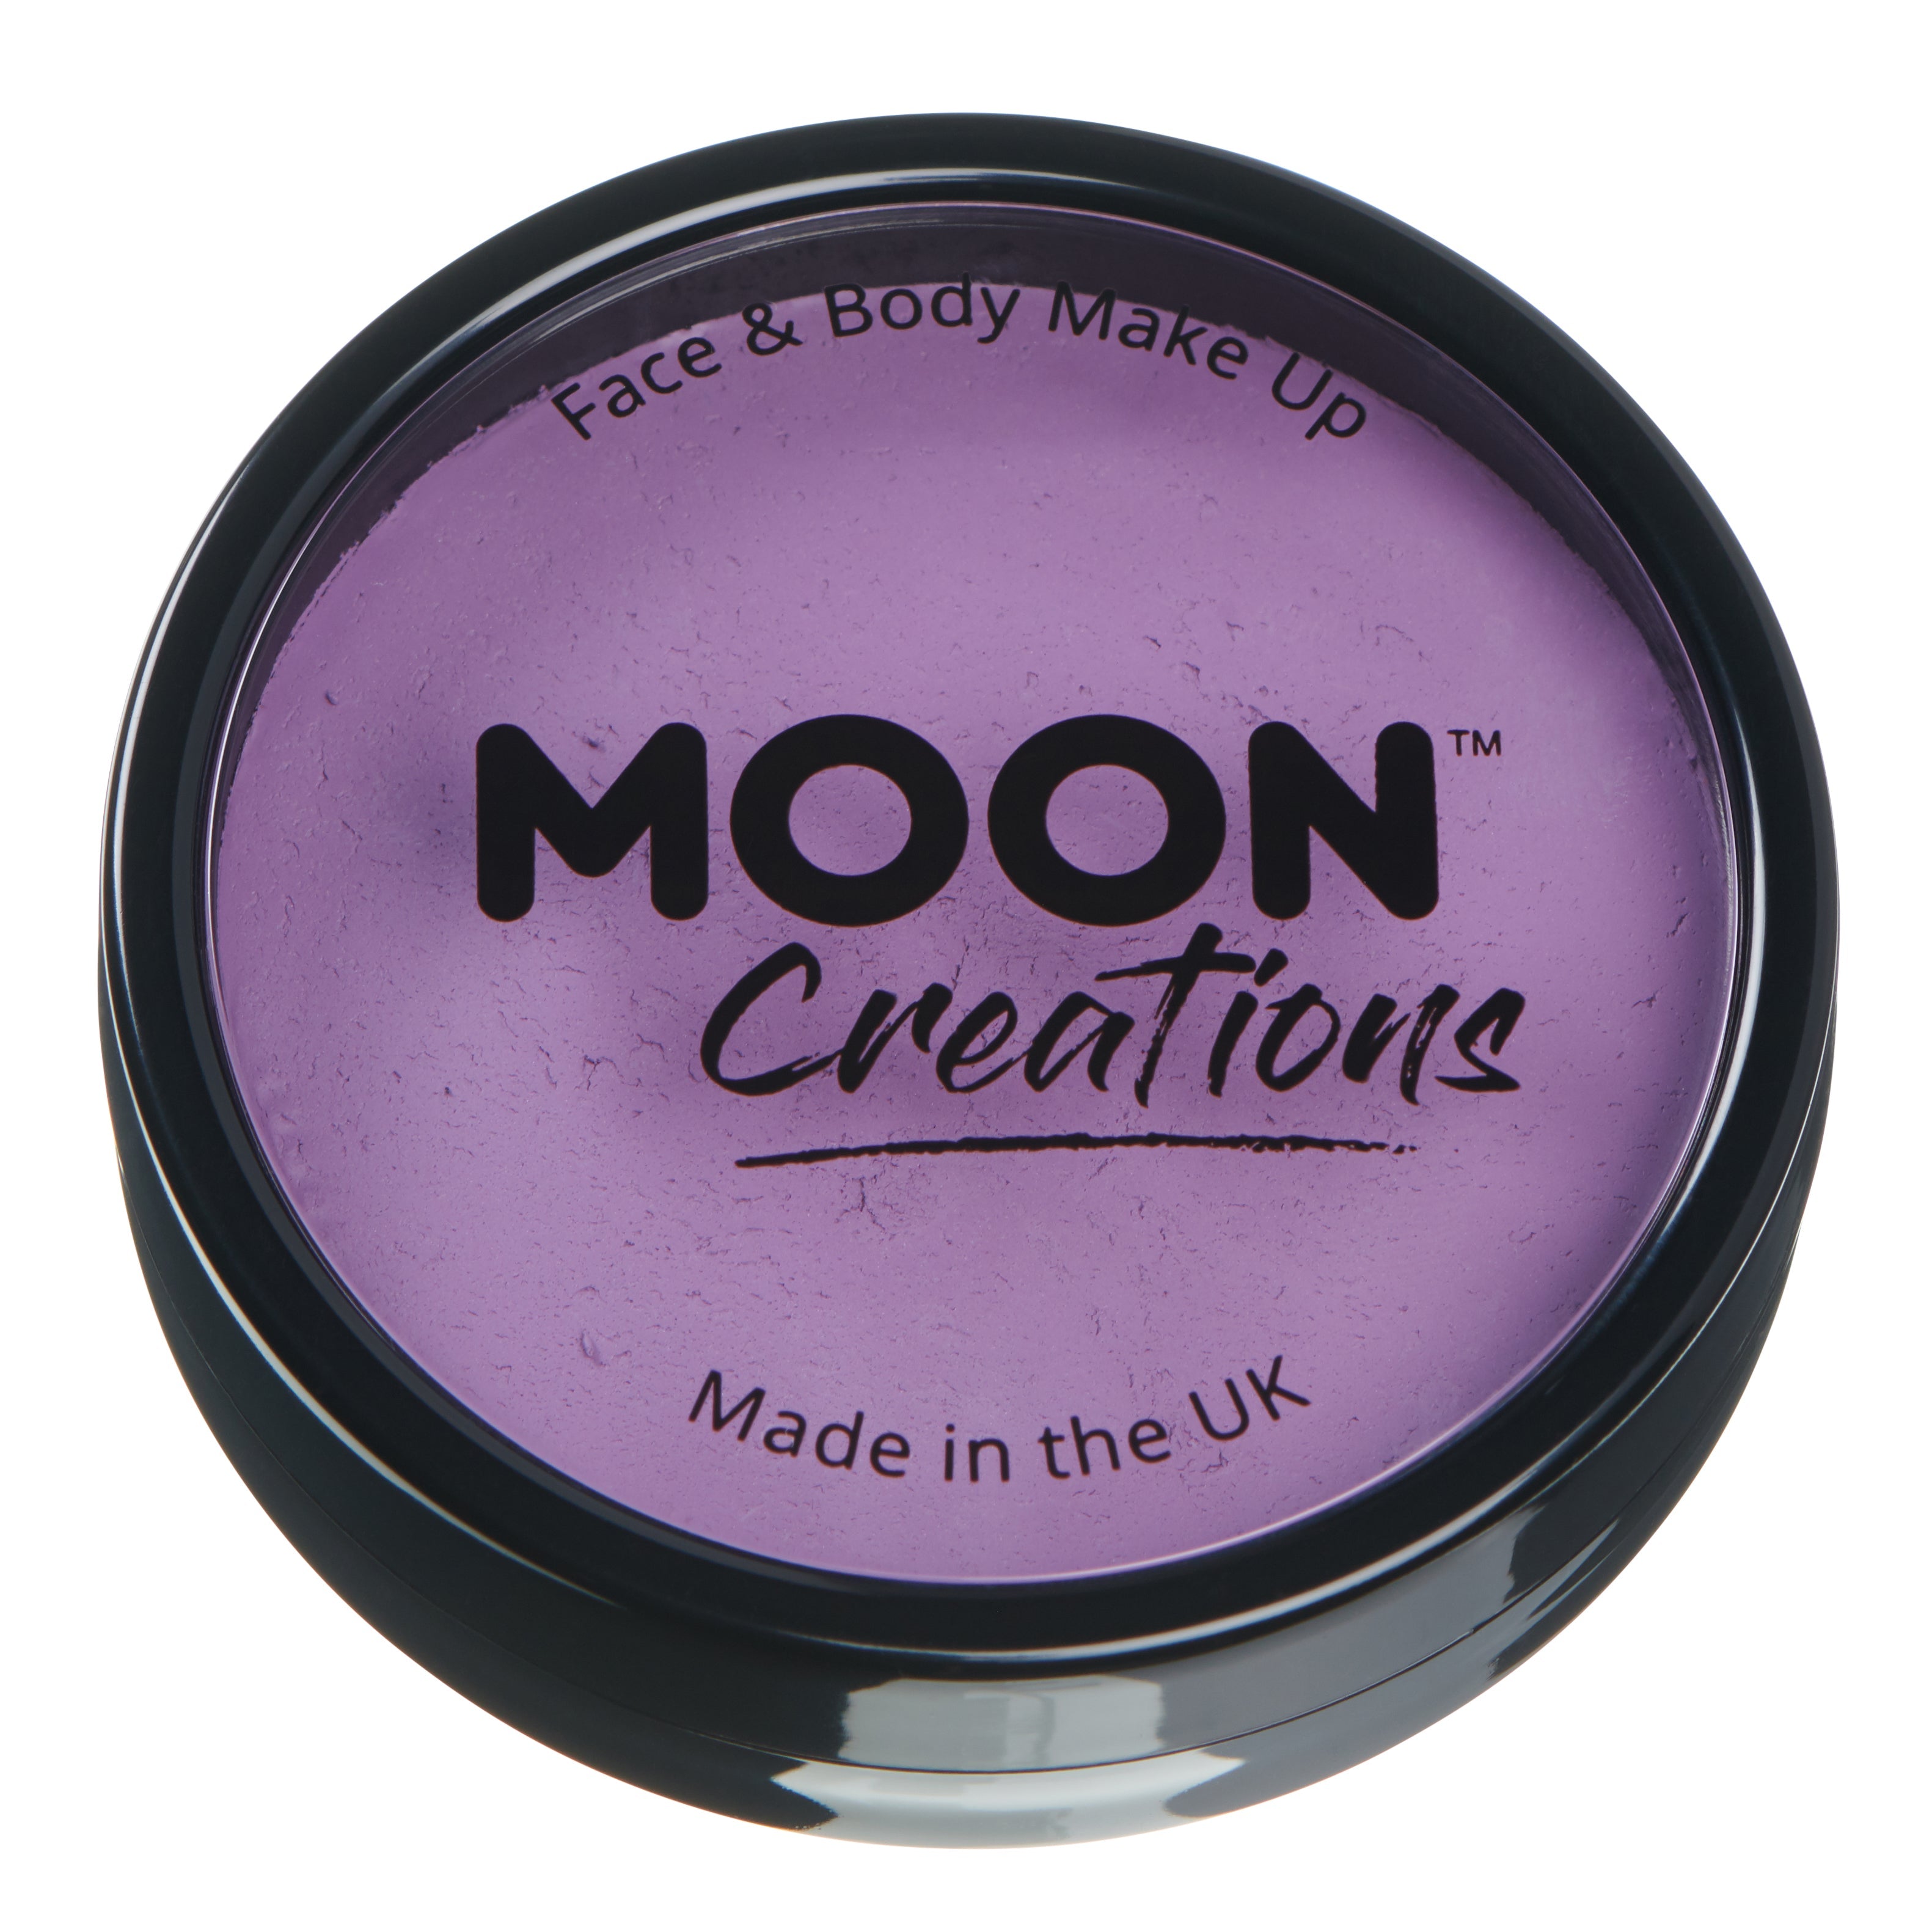 Wild Berry - Professional Face Paint, 36g. Cosmetically certified, FDA & Health Canada compliant, cruelty free and vegan.